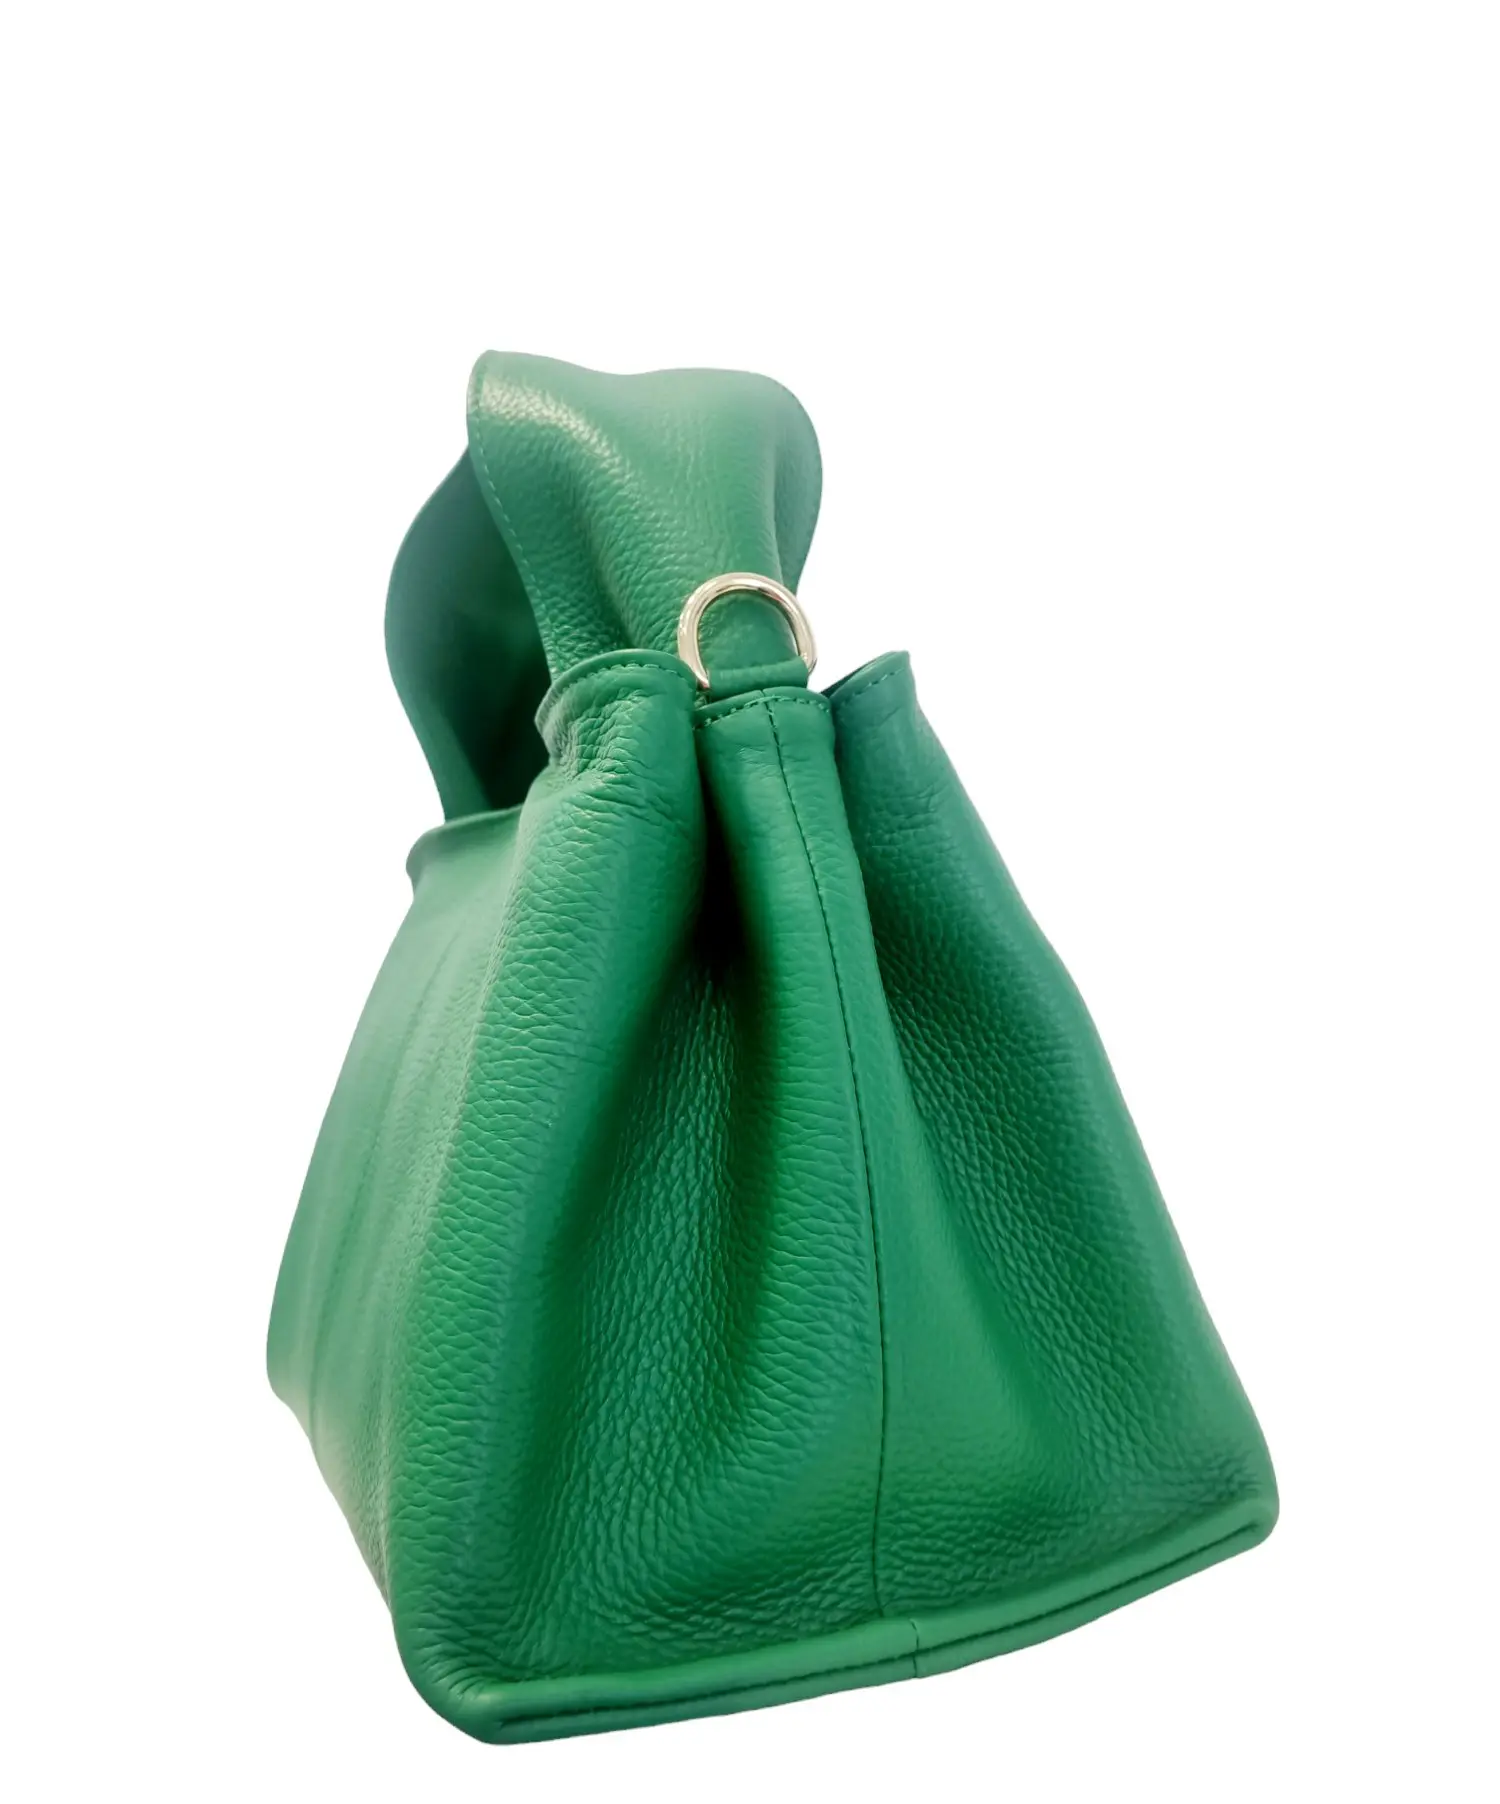 Green genuine leather bag, made in Italy, equipped with shoulder strap and lined interior with double side pockets. Zip closure. Measurements L 27 B16 H20